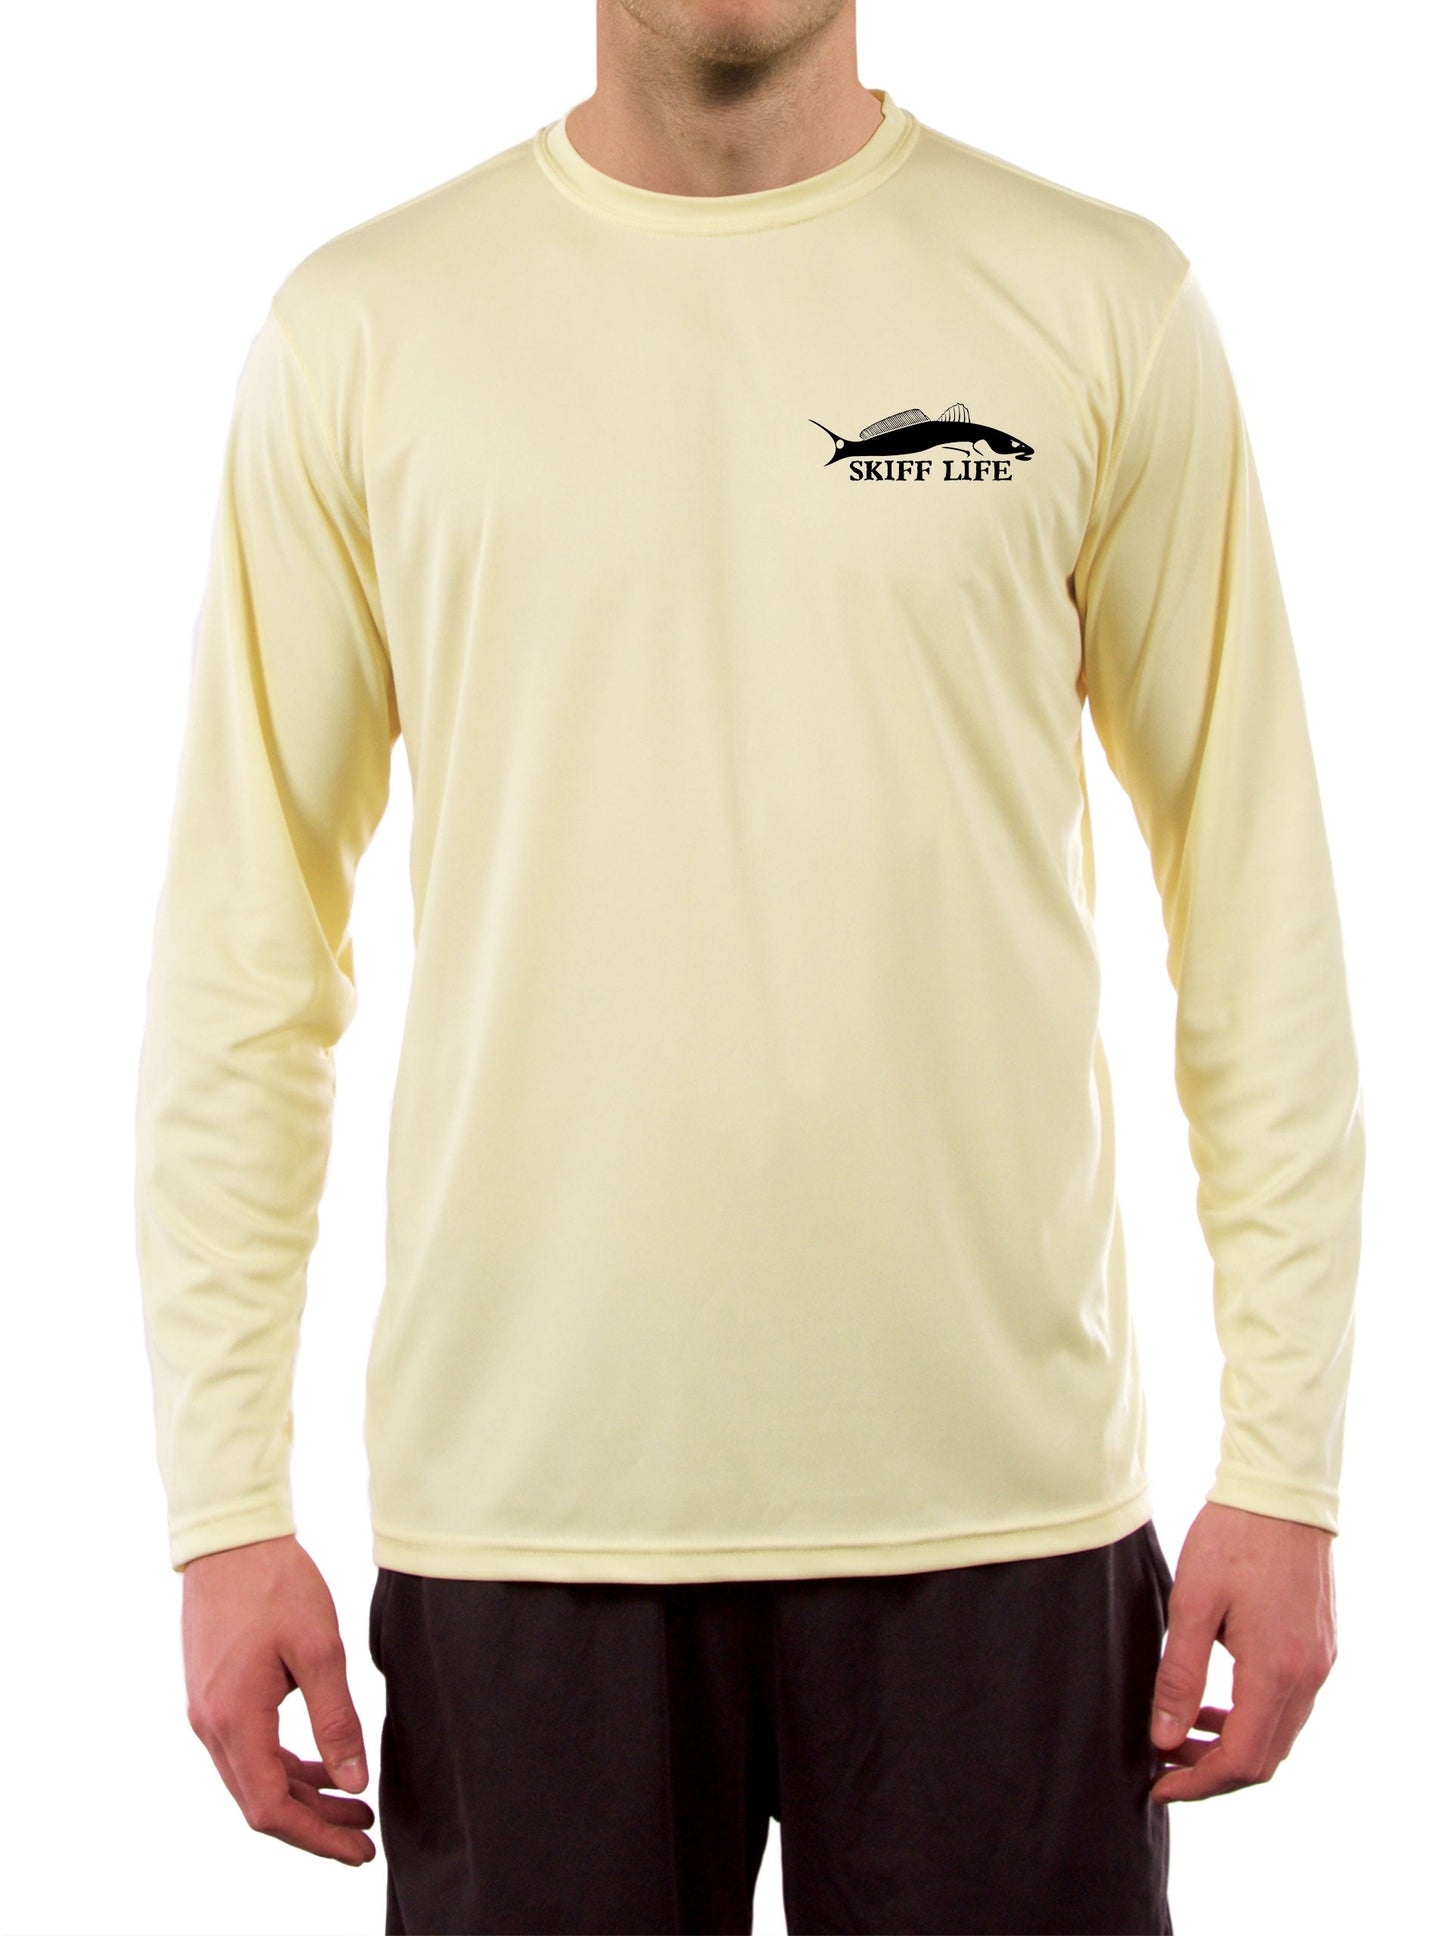 Big and Tall Mens Clothing - UV Protected Fishing t shirt +50 Sun  Protection with Moisture Wicking Technology - Up to 4XL